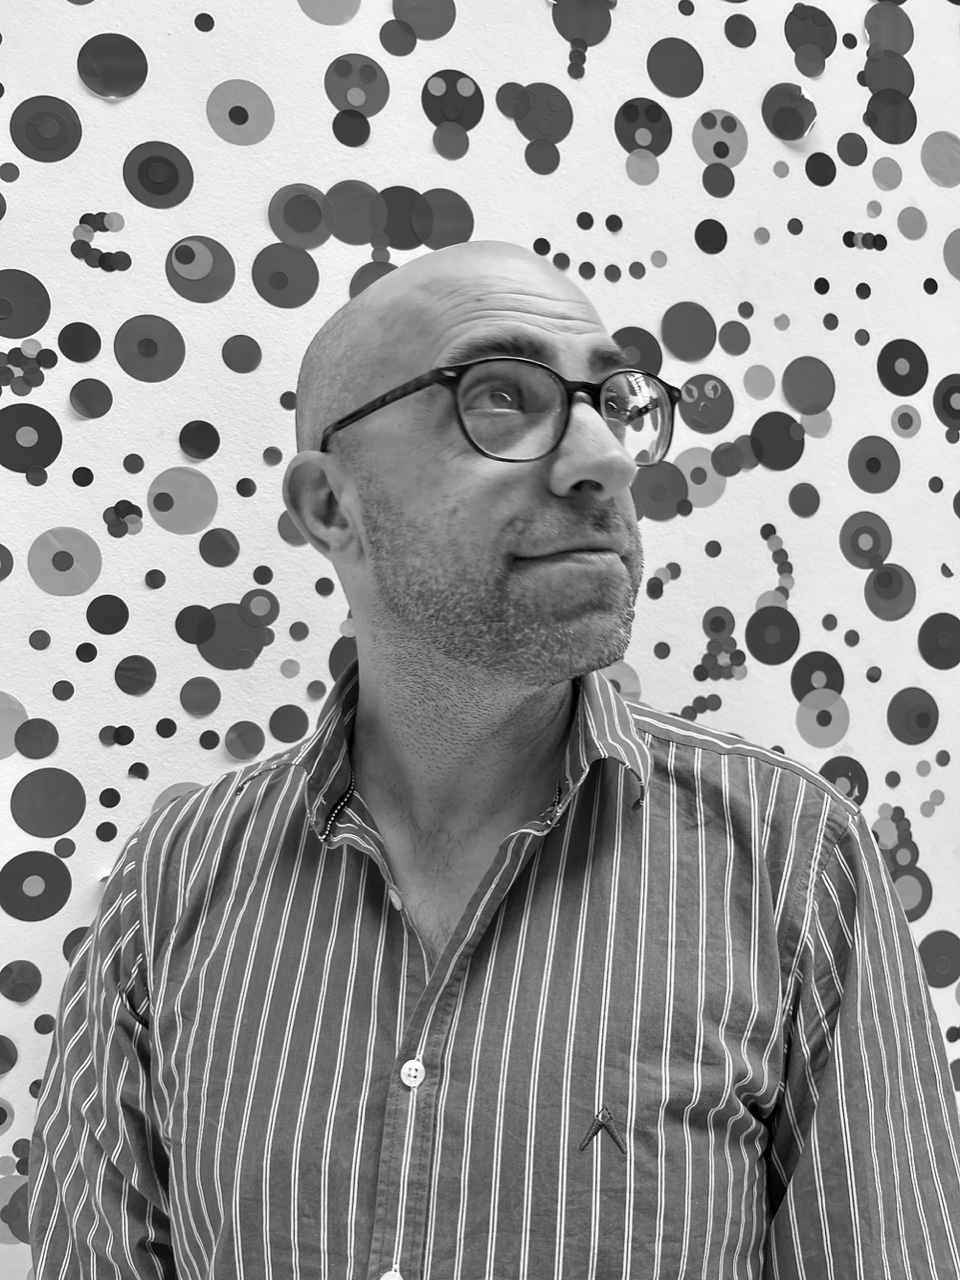 A greyscale photo of a bald man wearing glasses and a stripped shirt. The background is various sized circles